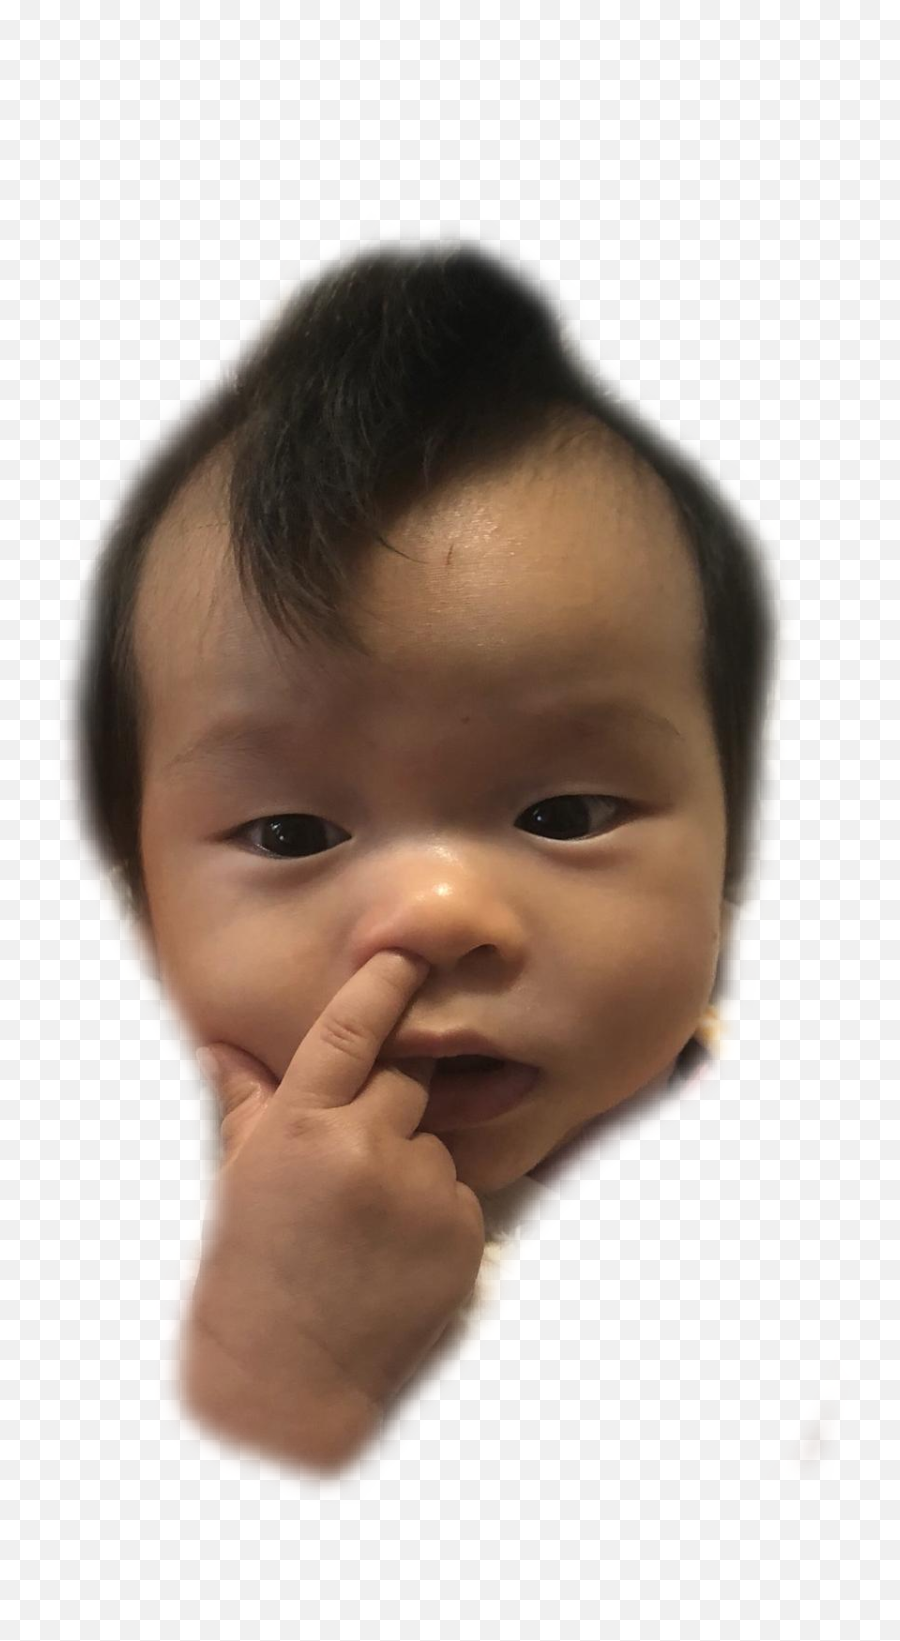 Pick Your Nose Sticker By Dino - Baby Looking Curiously At Things Emoji,Nose Picking Emoji